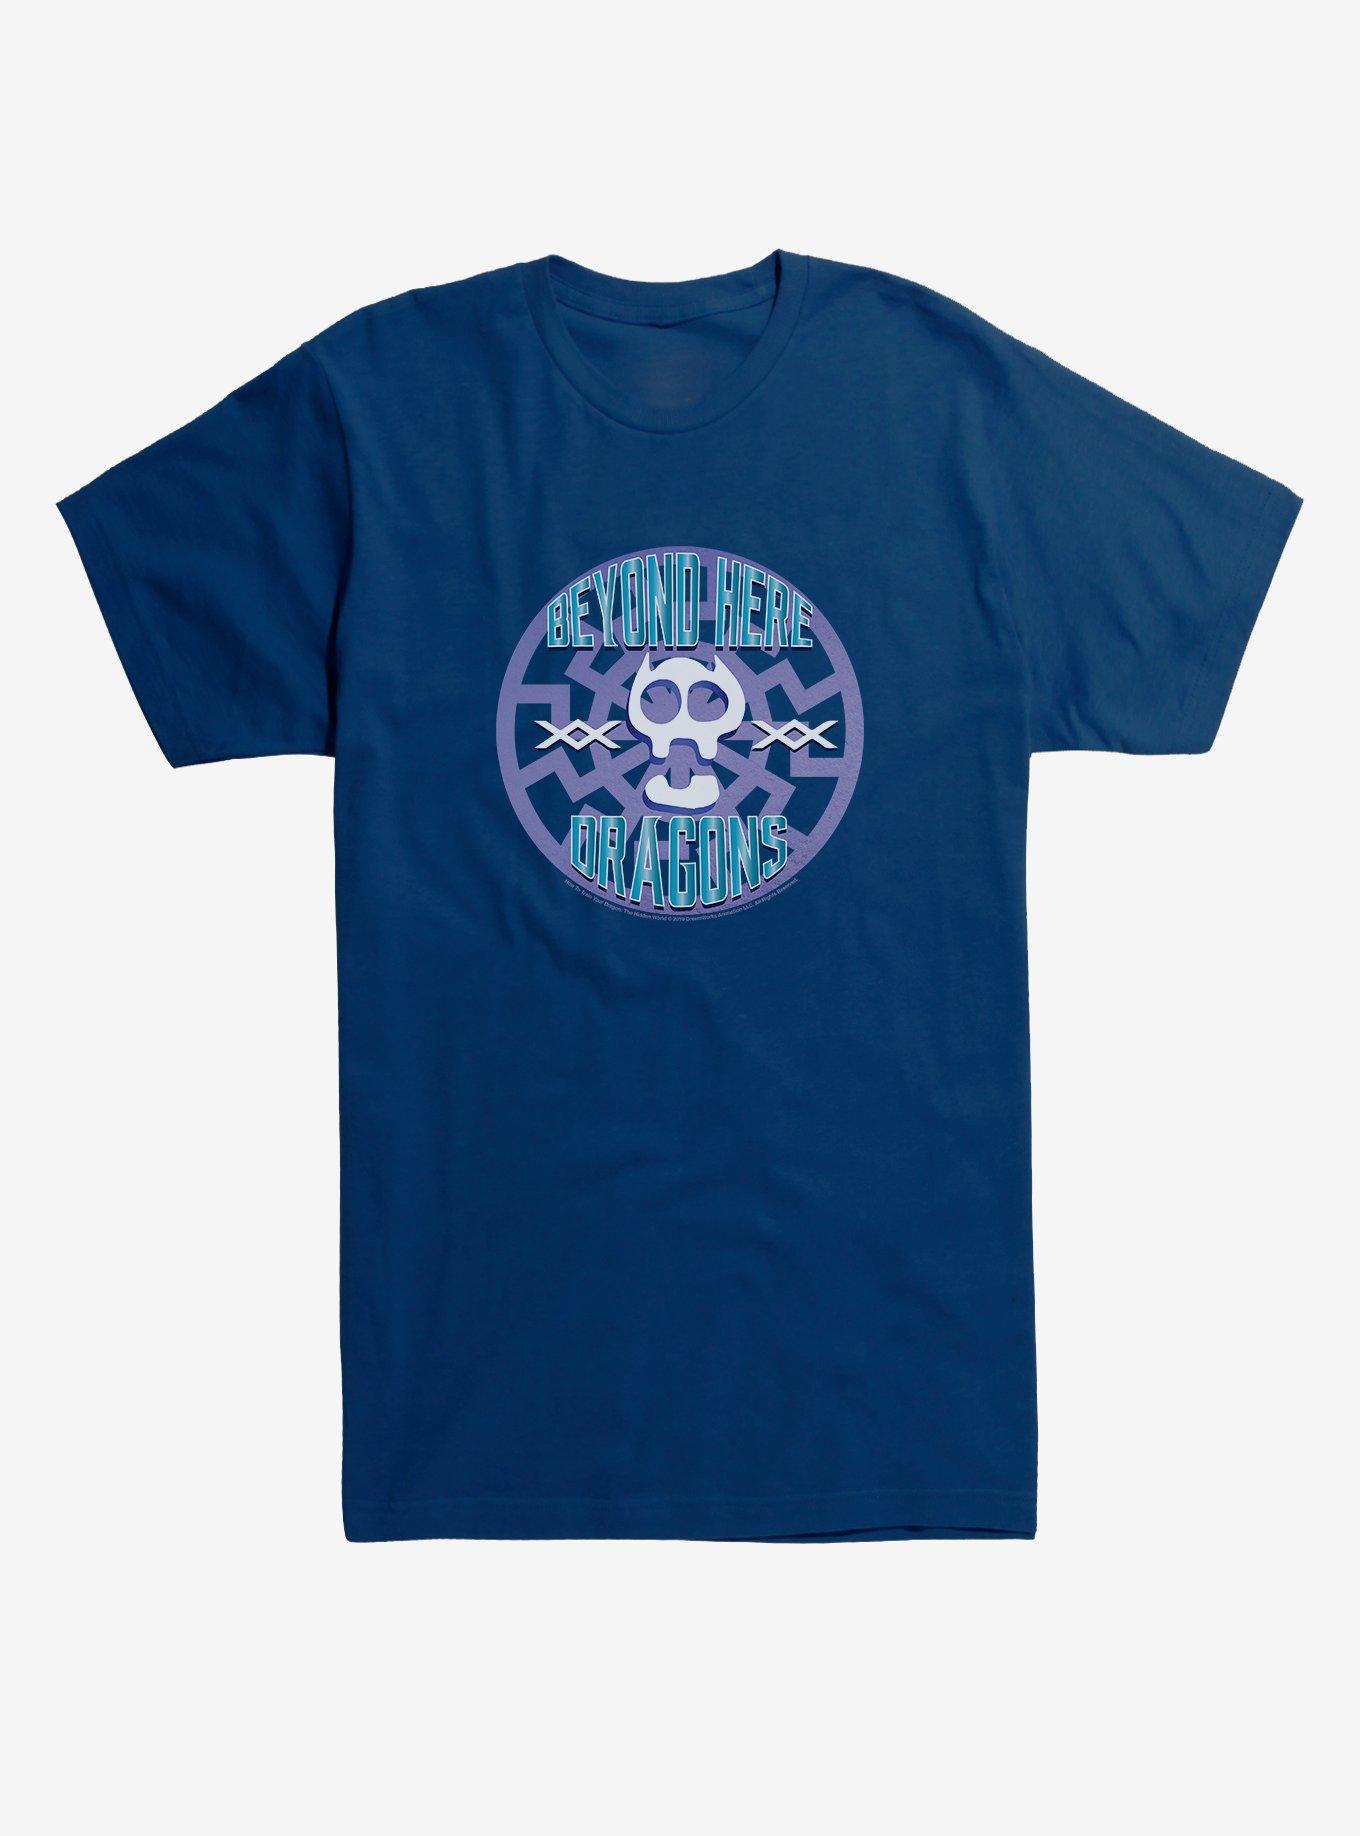 How To Train Your Dragon Beyond Here Dragons T-Shirt, MIDNIGHT NAVY, hi-res